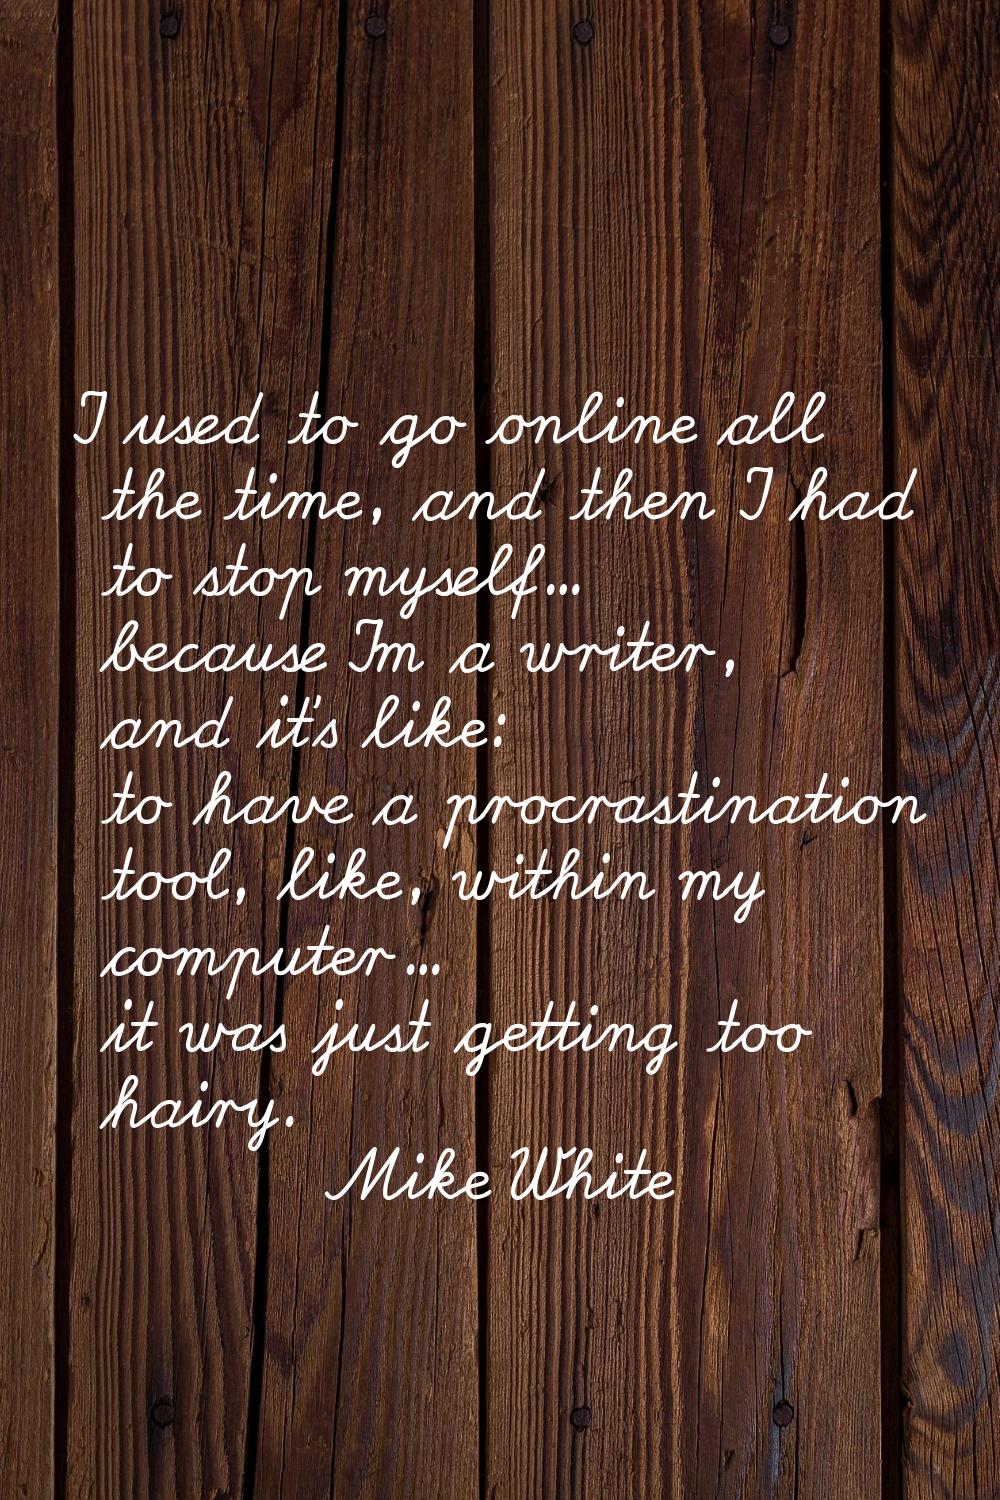 I used to go online all the time, and then I had to stop myself... because I'm a writer, and it's l